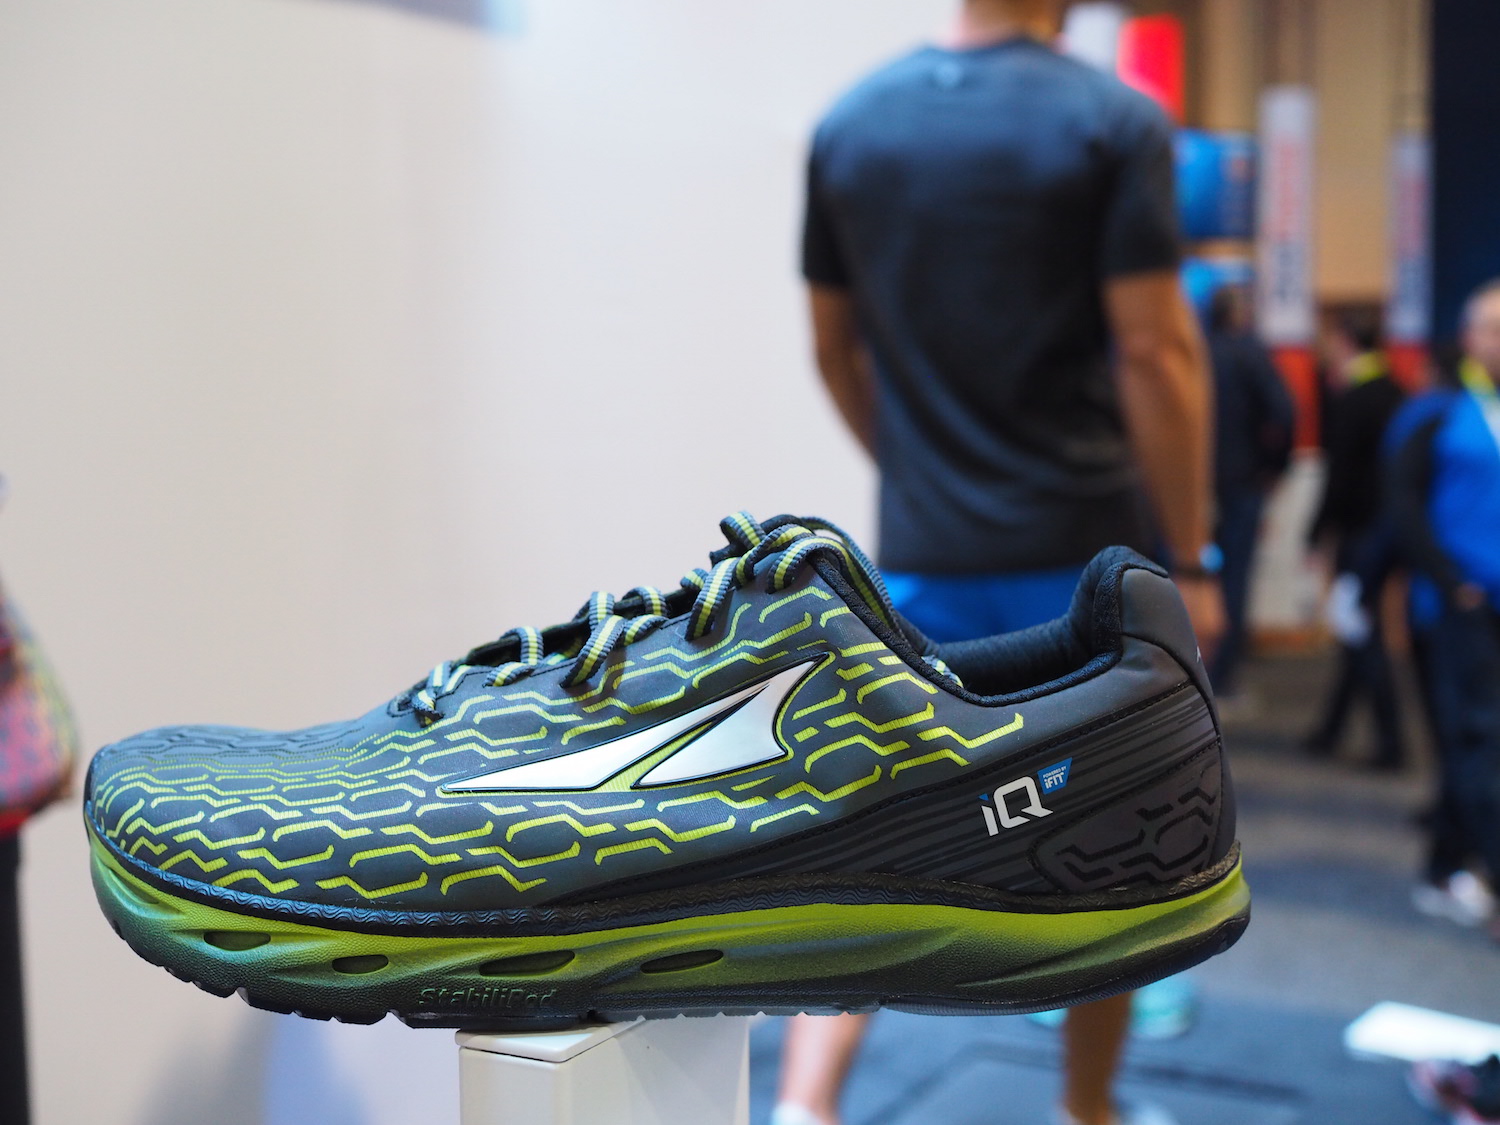 iFit's Connected Shoes Track Your Running Form | Tom's Guide